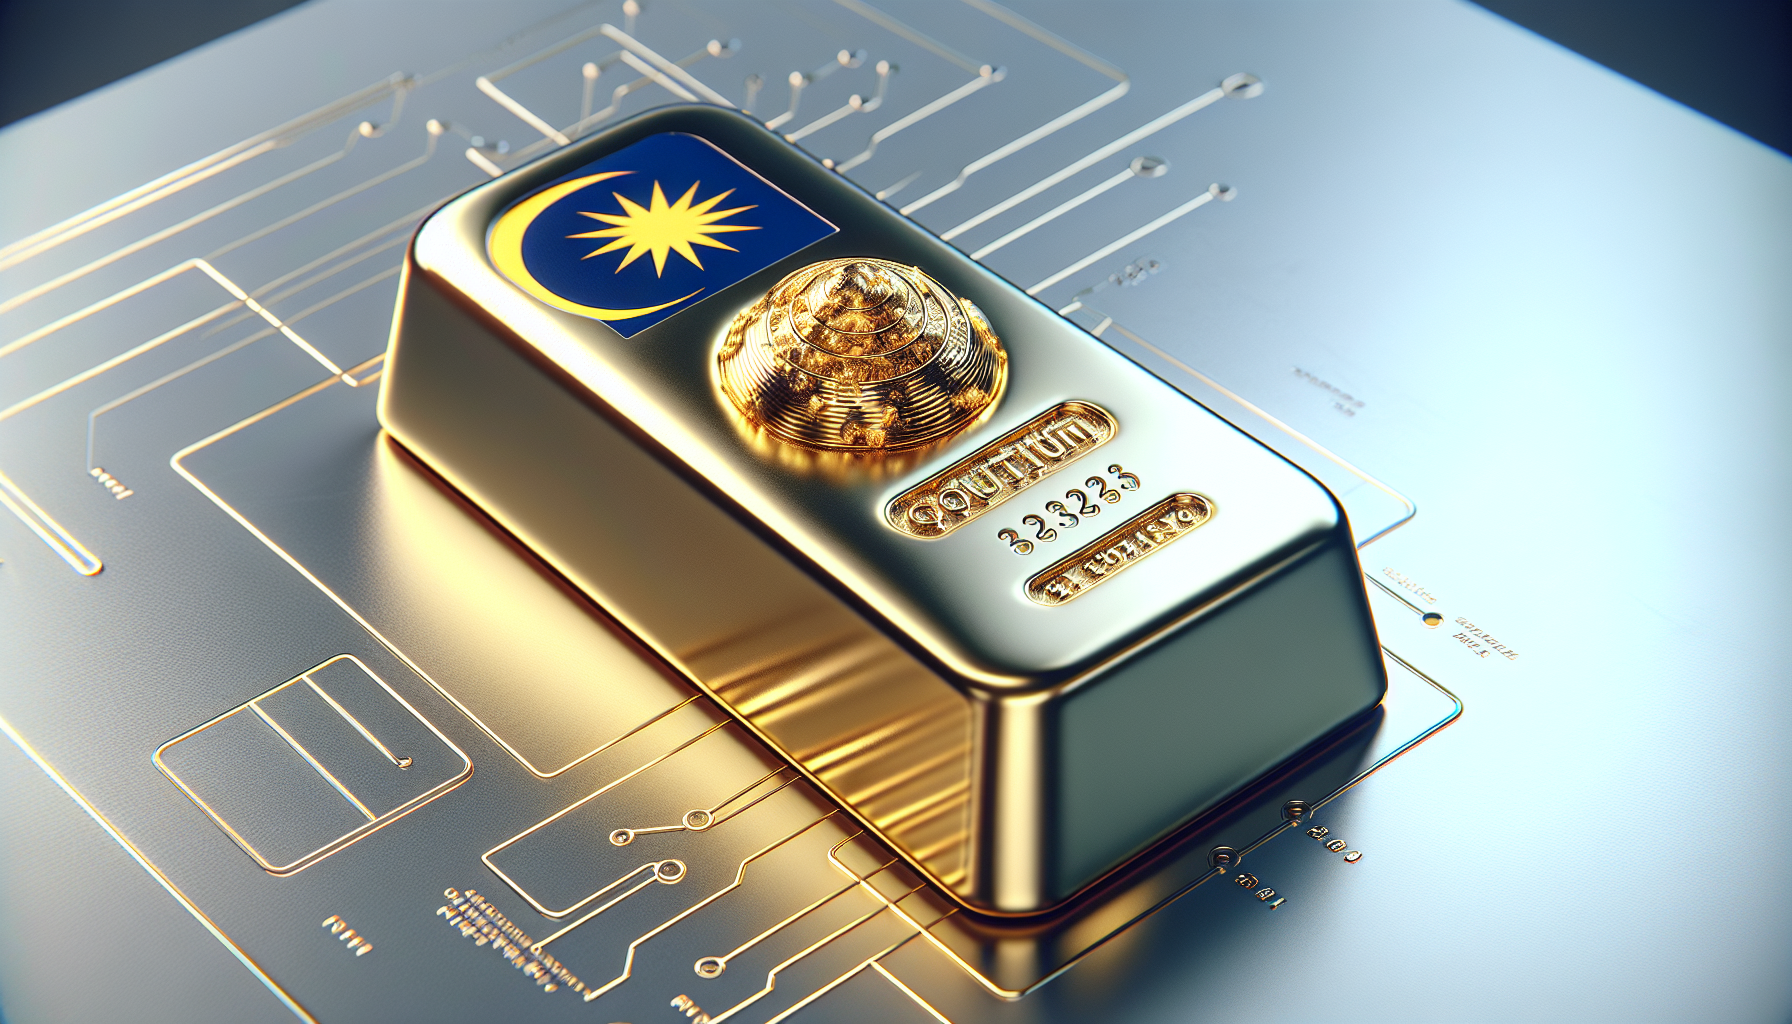 What Are The Challenges Of Investing In Gold Mining Stocks In Malaysia?